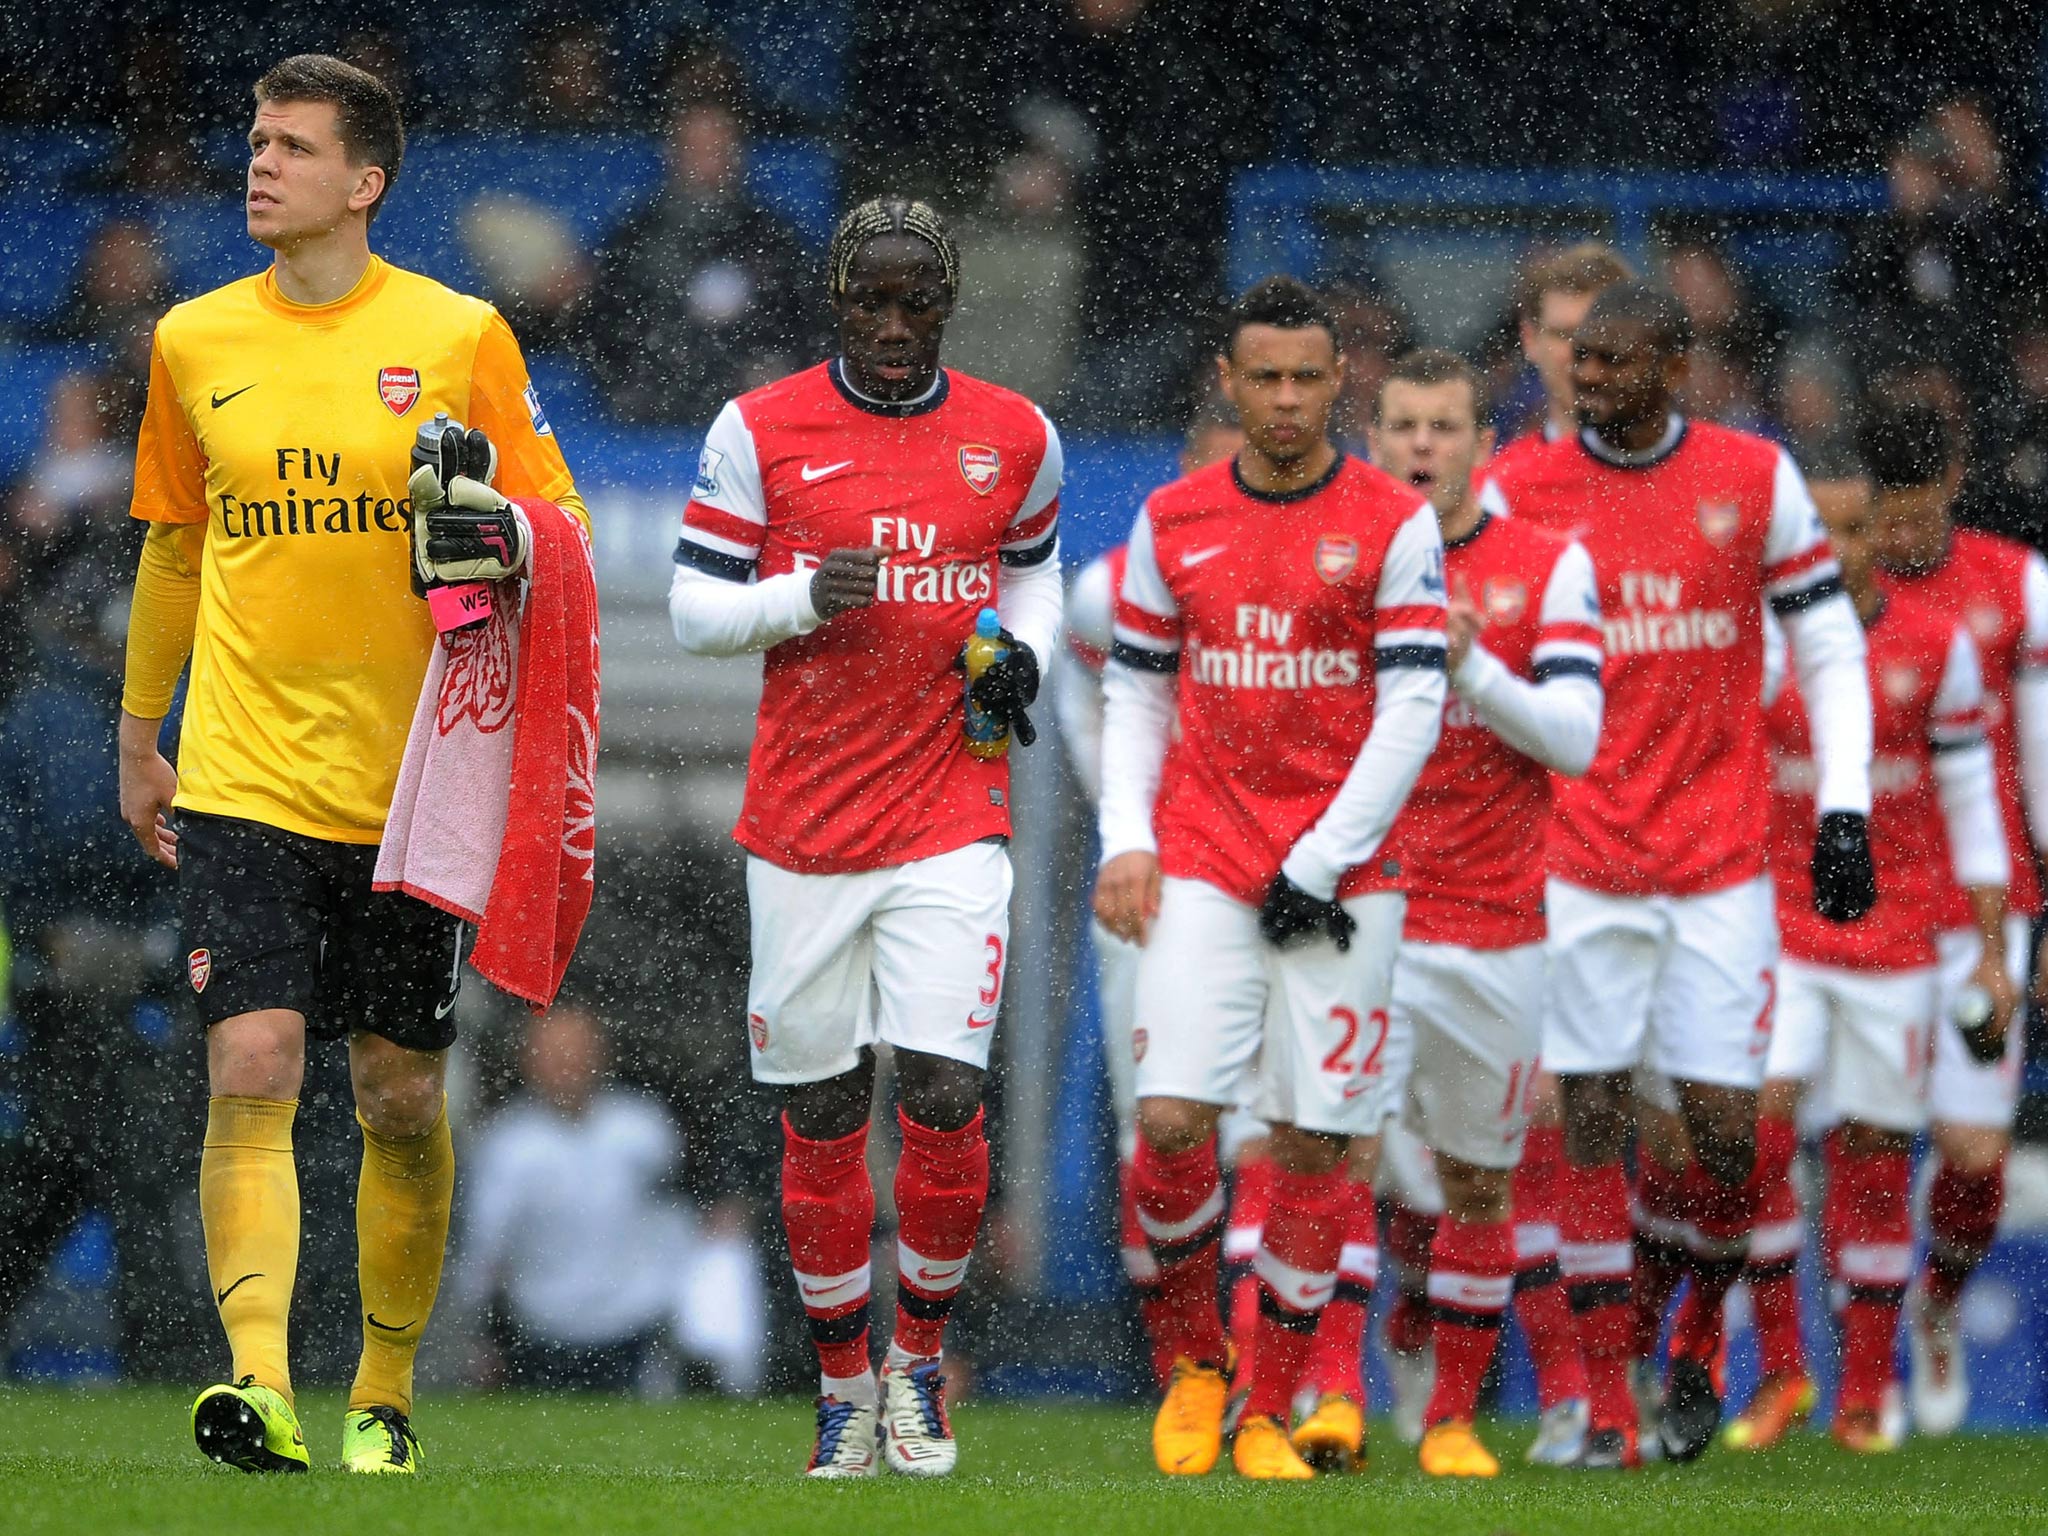 Arsenal walk out onto the pitch against Chelsea